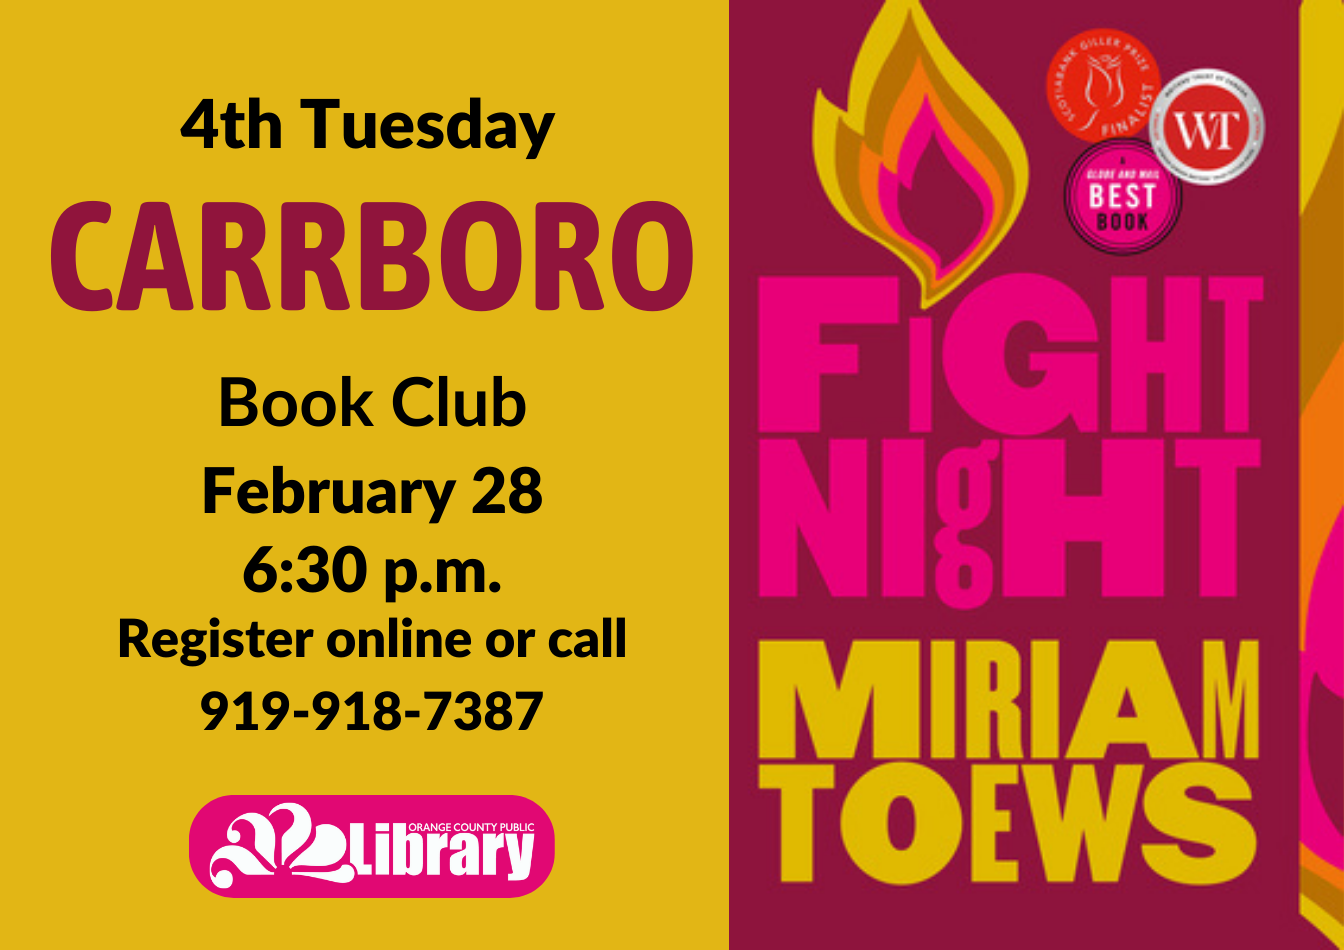 A yellow flyer with the cover of this month's book, Fight Night by Miriam Toews. The cover is hot pink with a collage-style fire over the I in fight. Text: Fourth Tuesday Carrboro Book Club. February 28, 6:30 PM. Register online or call 919-918-7387.